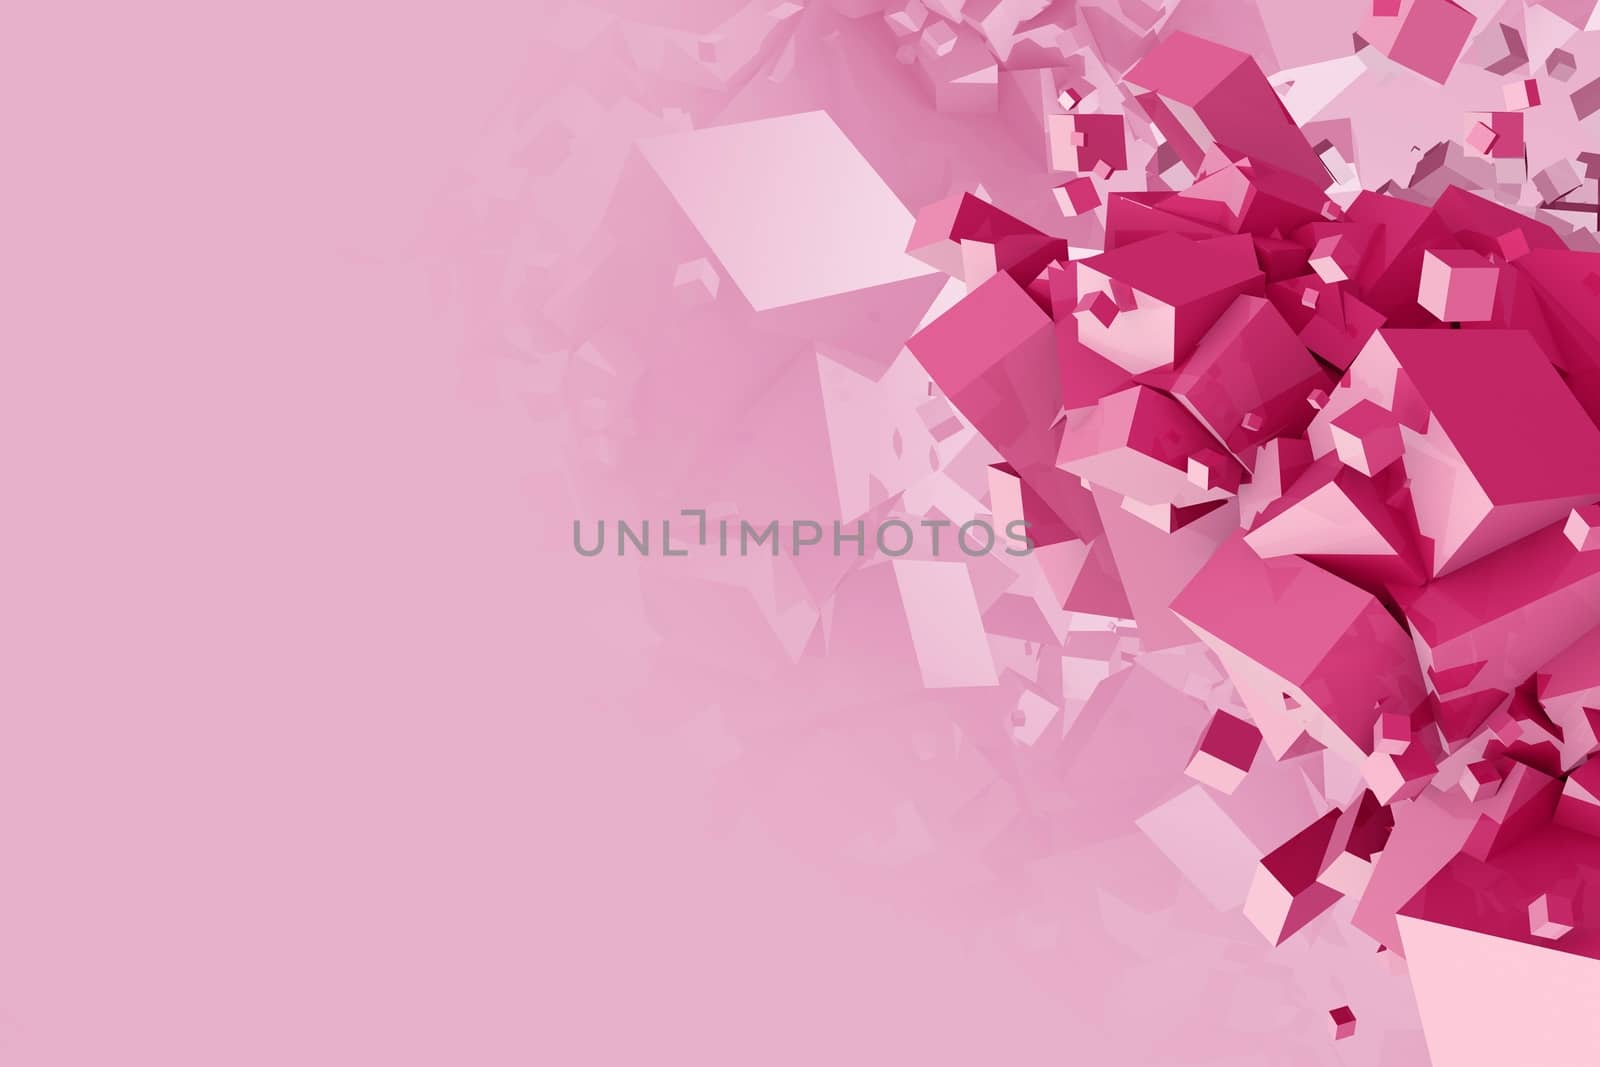 Pink Cubes Abstract Background 3D Illustration with Copy Space.